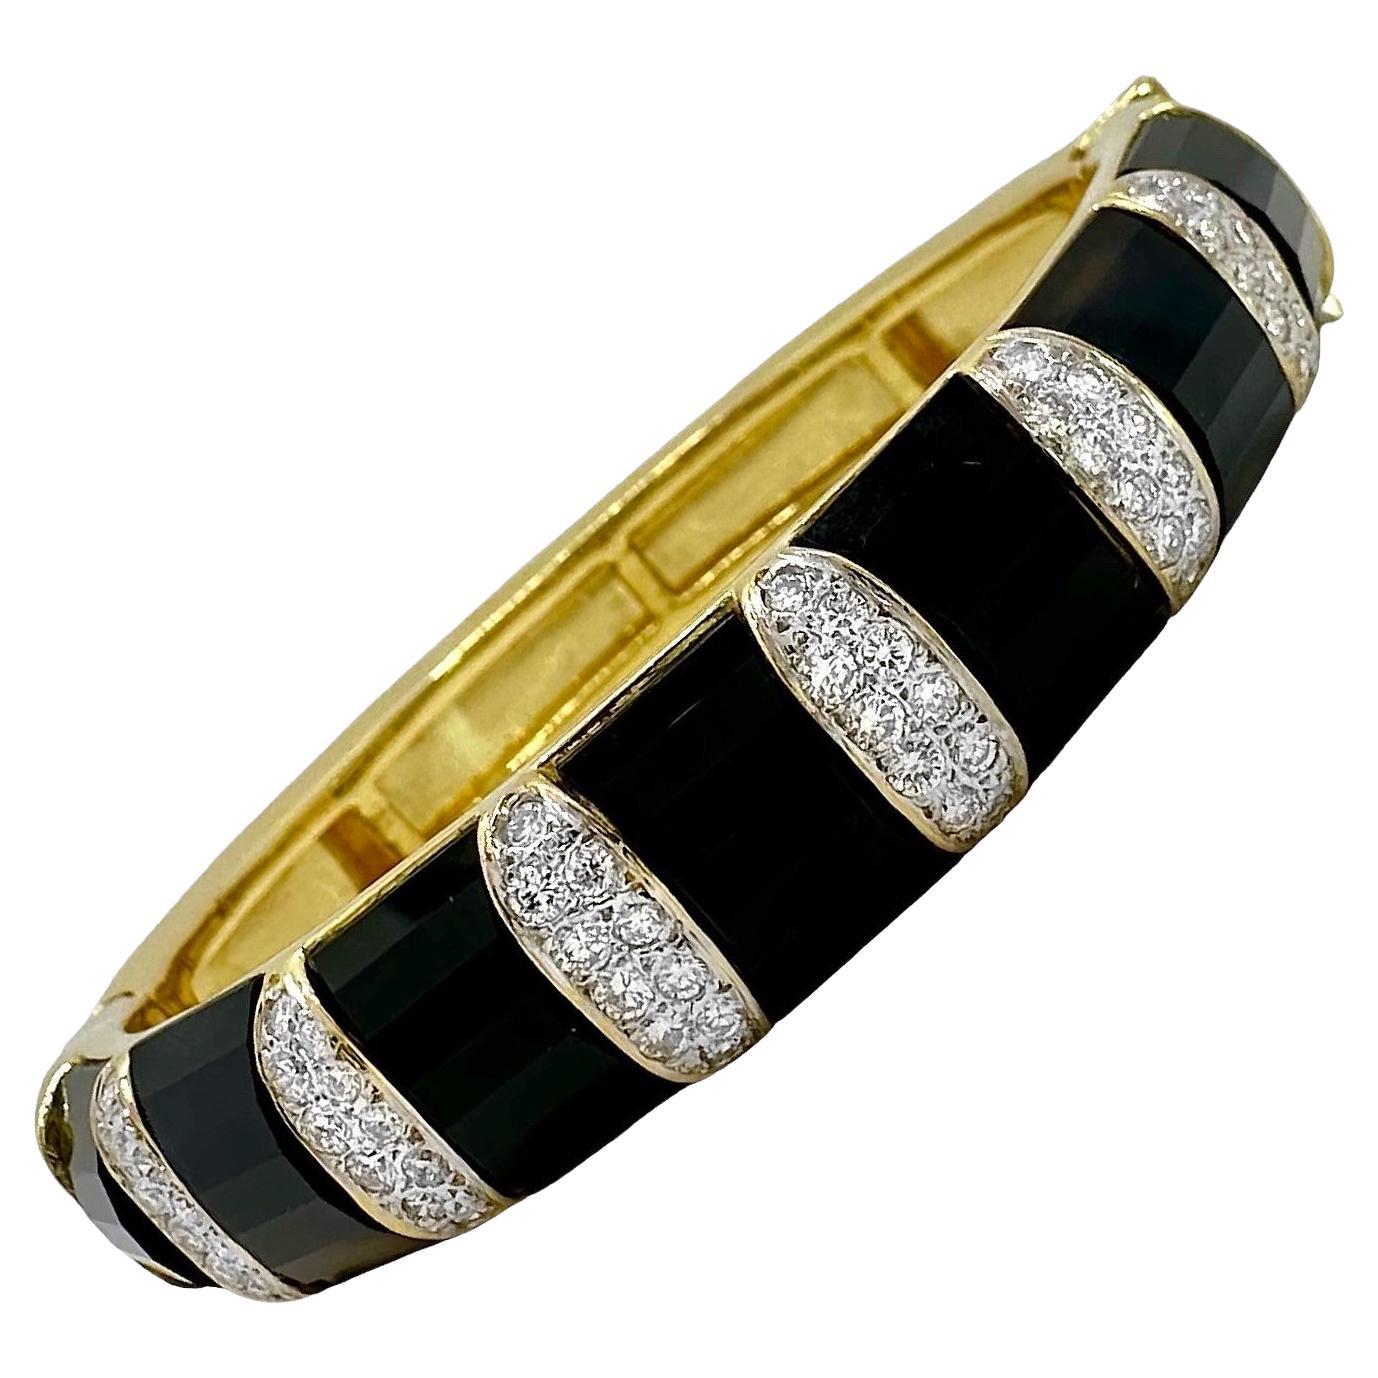 This beautiful and very well crafted 18k yellow gold bangle bracelet by well respected maker, La Triomphe is pure 1970's high style. Characteristic of their offerings, every element of this hinged bracelet is artfully done. Every diamond is set into